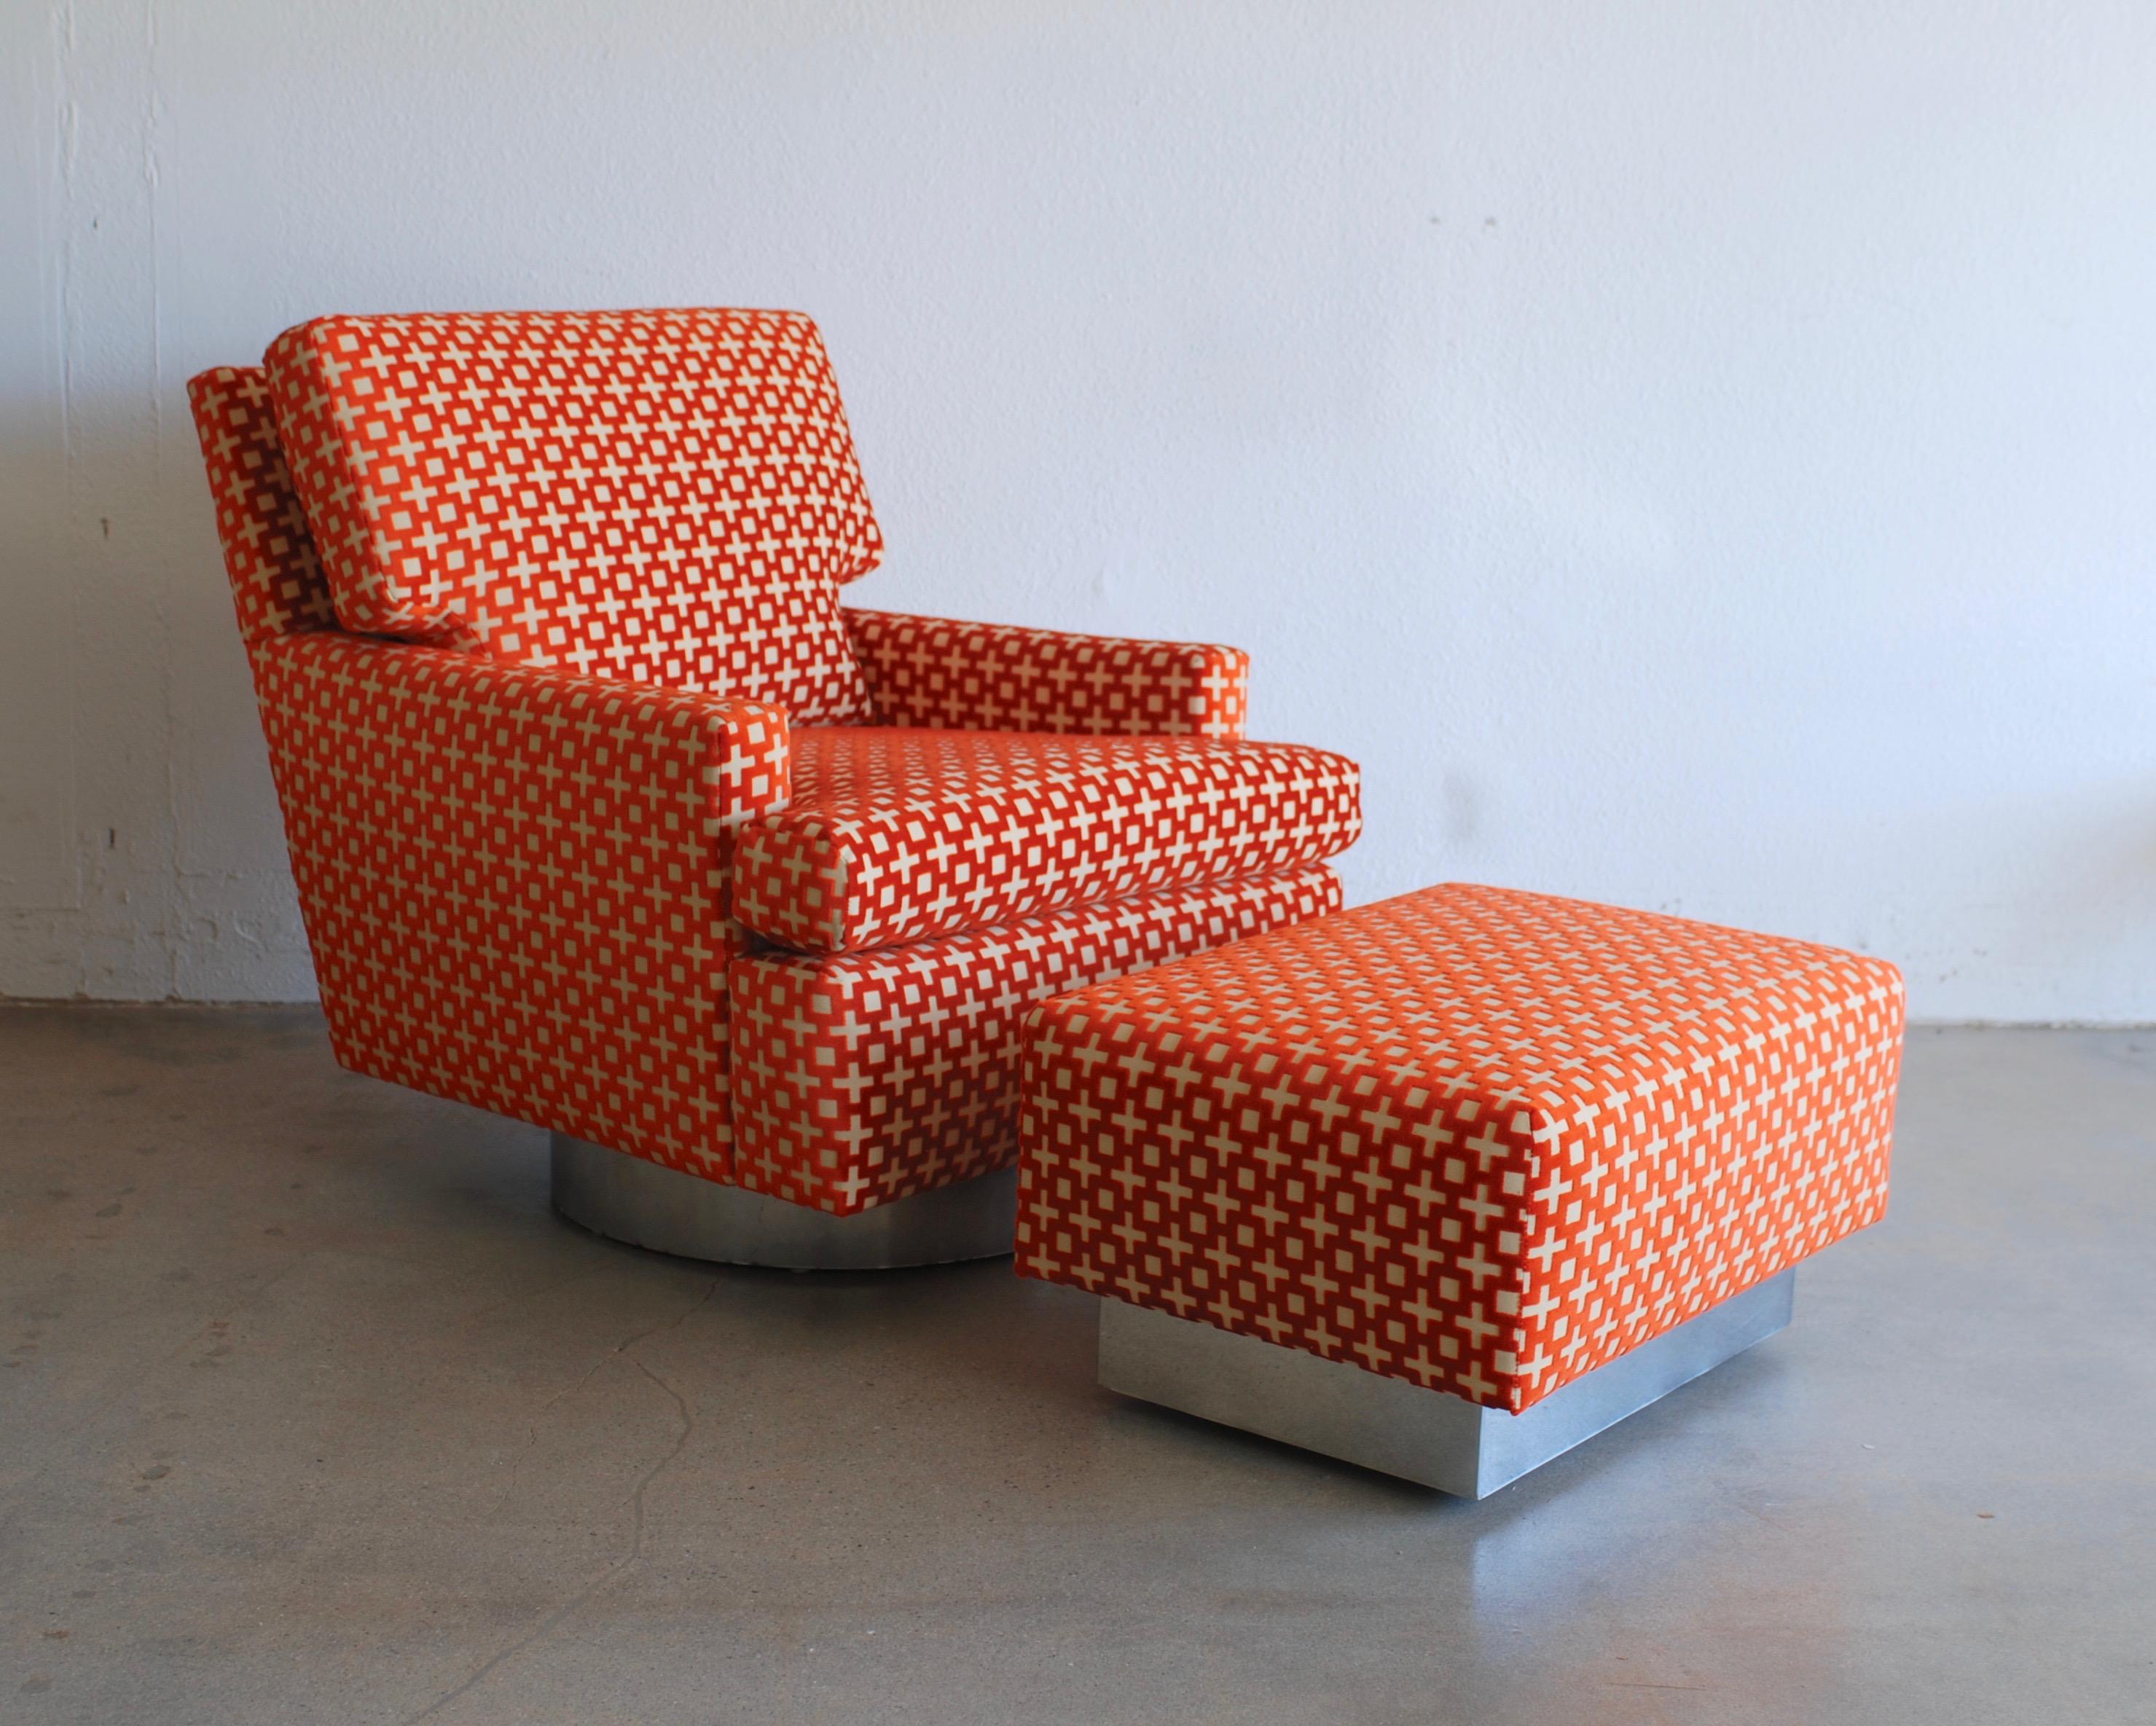 The raised velvet burnt orange geometric patterned fabric on this swivel lounge chair is reminiscent of David Hick's style. The color and geometric of the fabric really pops against the chrome swivel base of the chair. The ottoman base has hidden